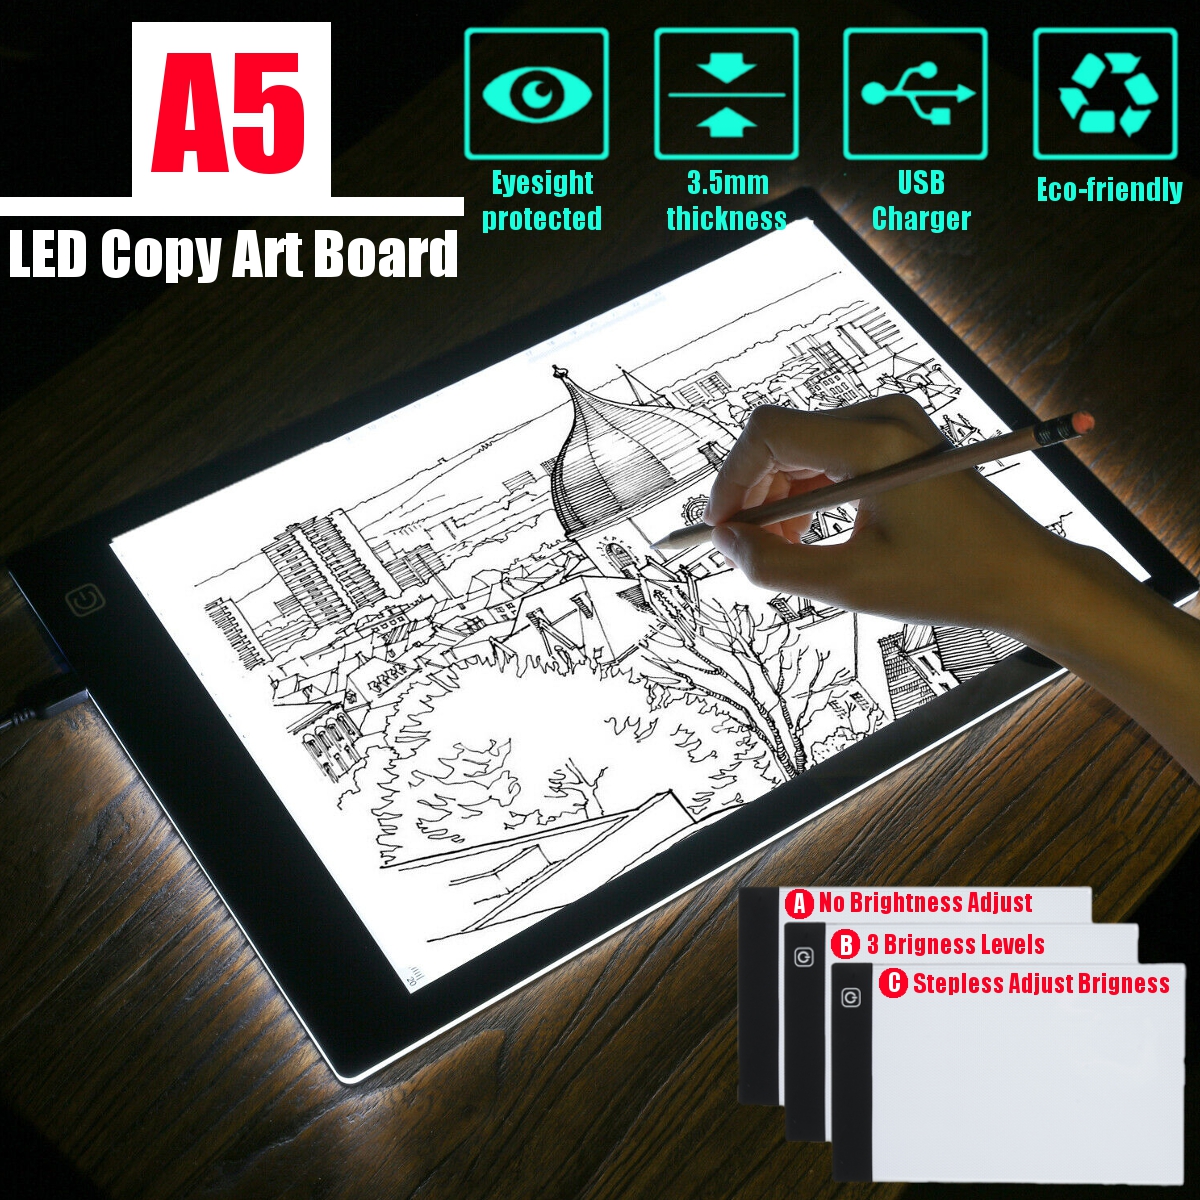 A5-LED-Art-Craft-Drawing-Copy-Tracing-Tattoo-LED-Light-Box-Board-Pad-Thin-with-USB-Cable-Paintings-G-1631400-1